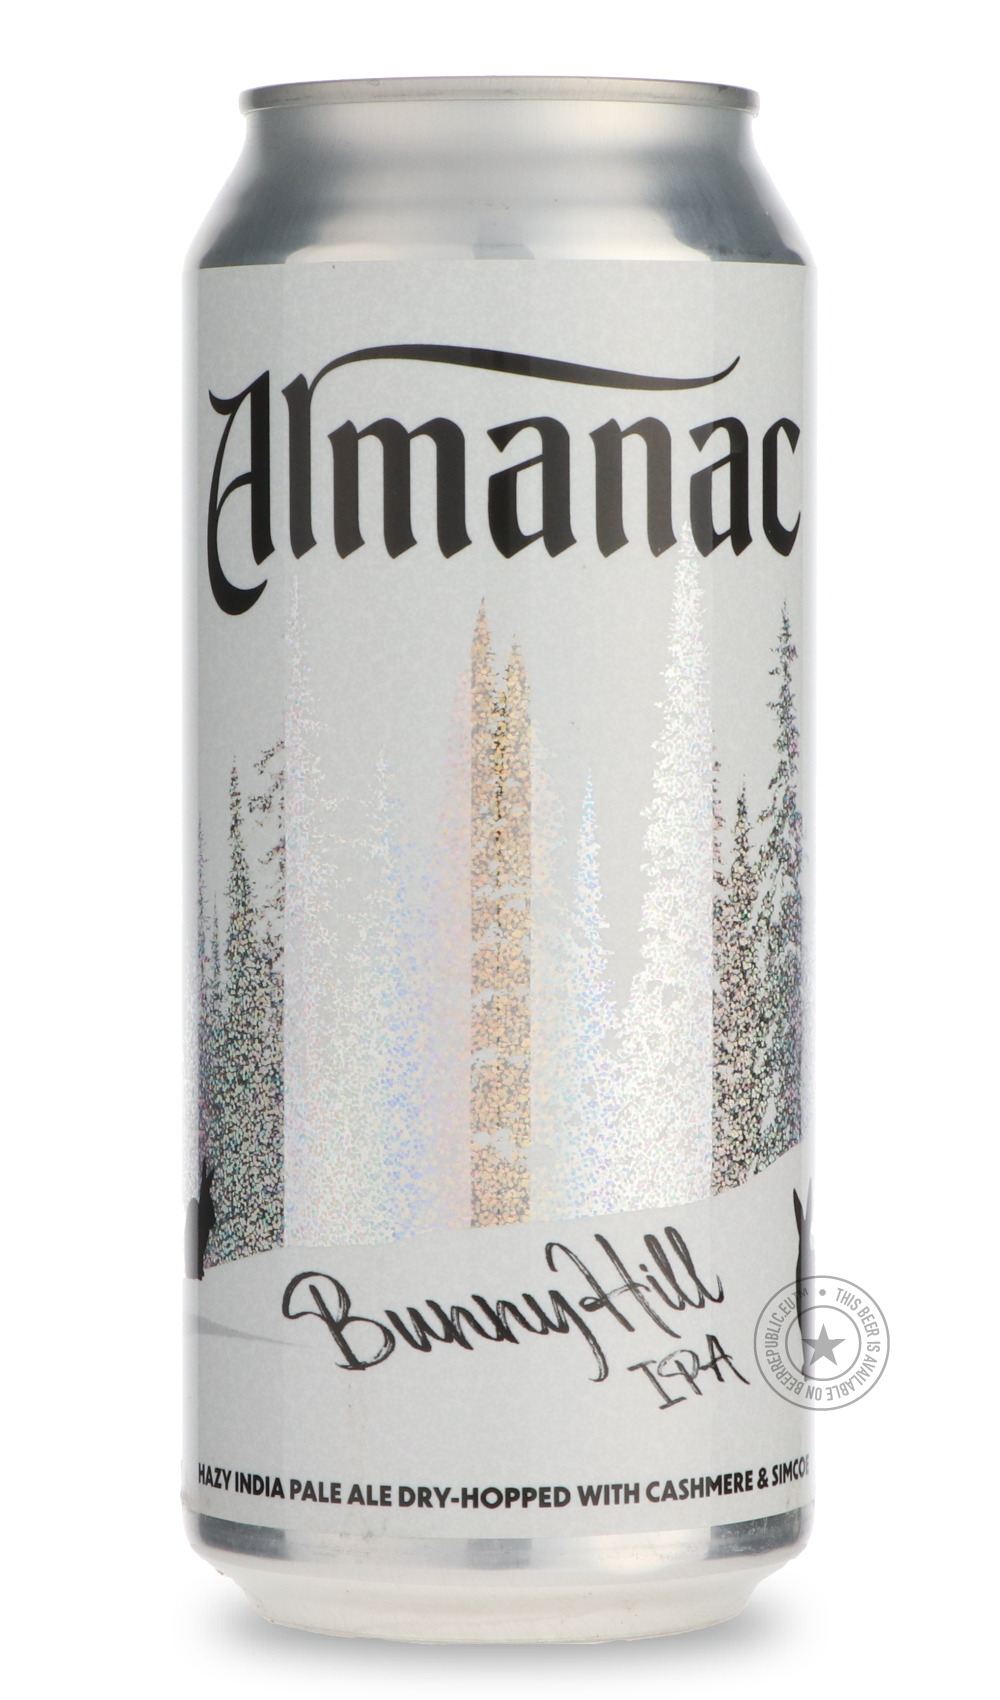 -Almanac- Bunny Hill IPA-IPA- Only @ Beer Republic - The best online beer store for American & Canadian craft beer - Buy beer online from the USA and Canada - Bier online kopen - Amerikaans bier kopen - Craft beer store - Craft beer kopen - Amerikanisch bier kaufen - Bier online kaufen - Acheter biere online - IPA - Stout - Porter - New England IPA - Hazy IPA - Imperial Stout - Barrel Aged - Barrel Aged Imperial Stout - Brown - Dark beer - Blond - Blonde - Pilsner - Lager - Wheat - Weizen - Amber - Barley W